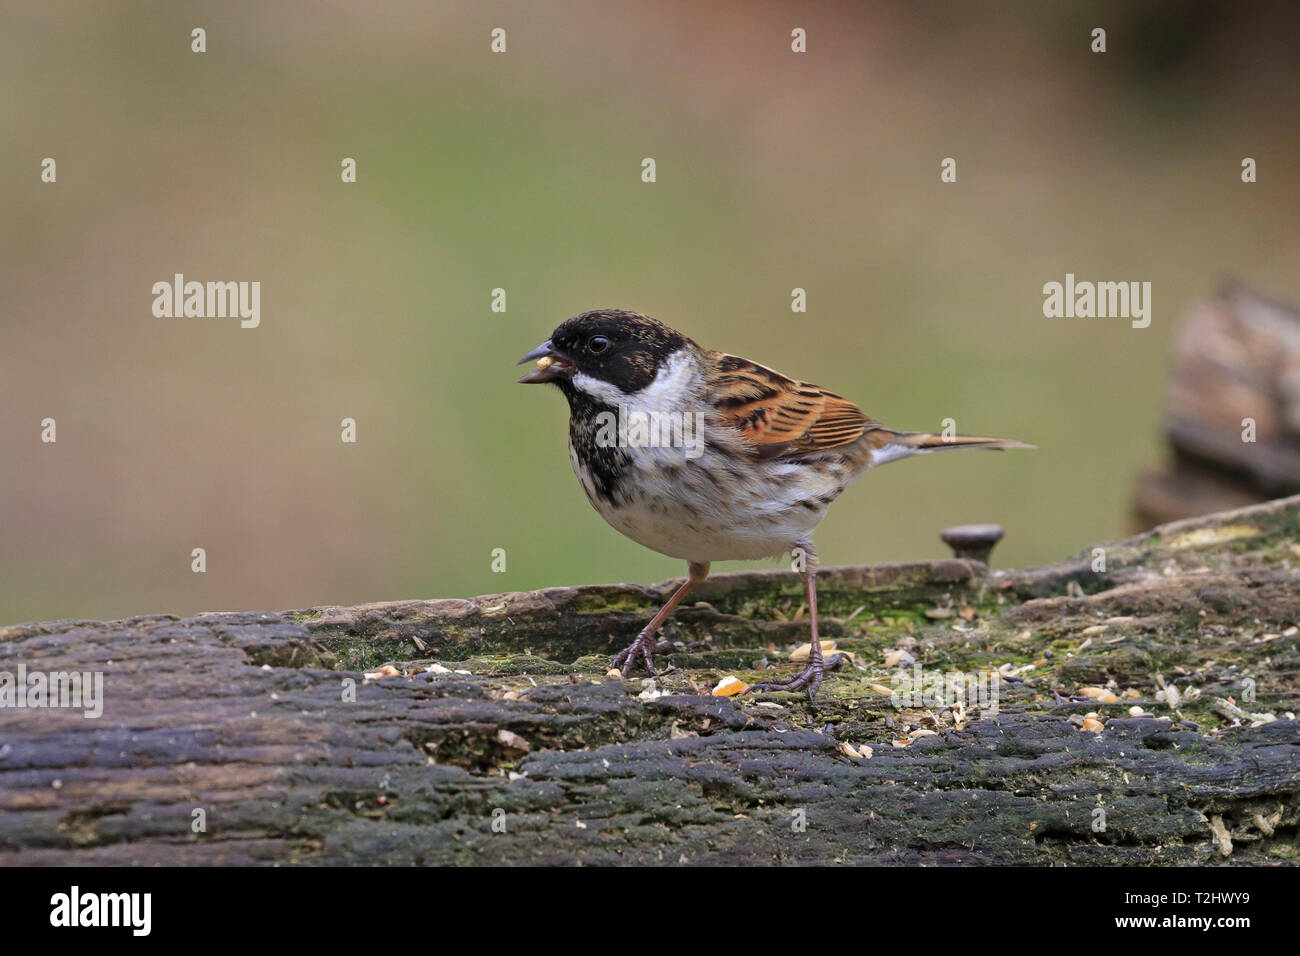 Male Reed Bunting, Emberiza schoeniclus eating bird seed on a decaying tree branch, England, UK. Stock Photo